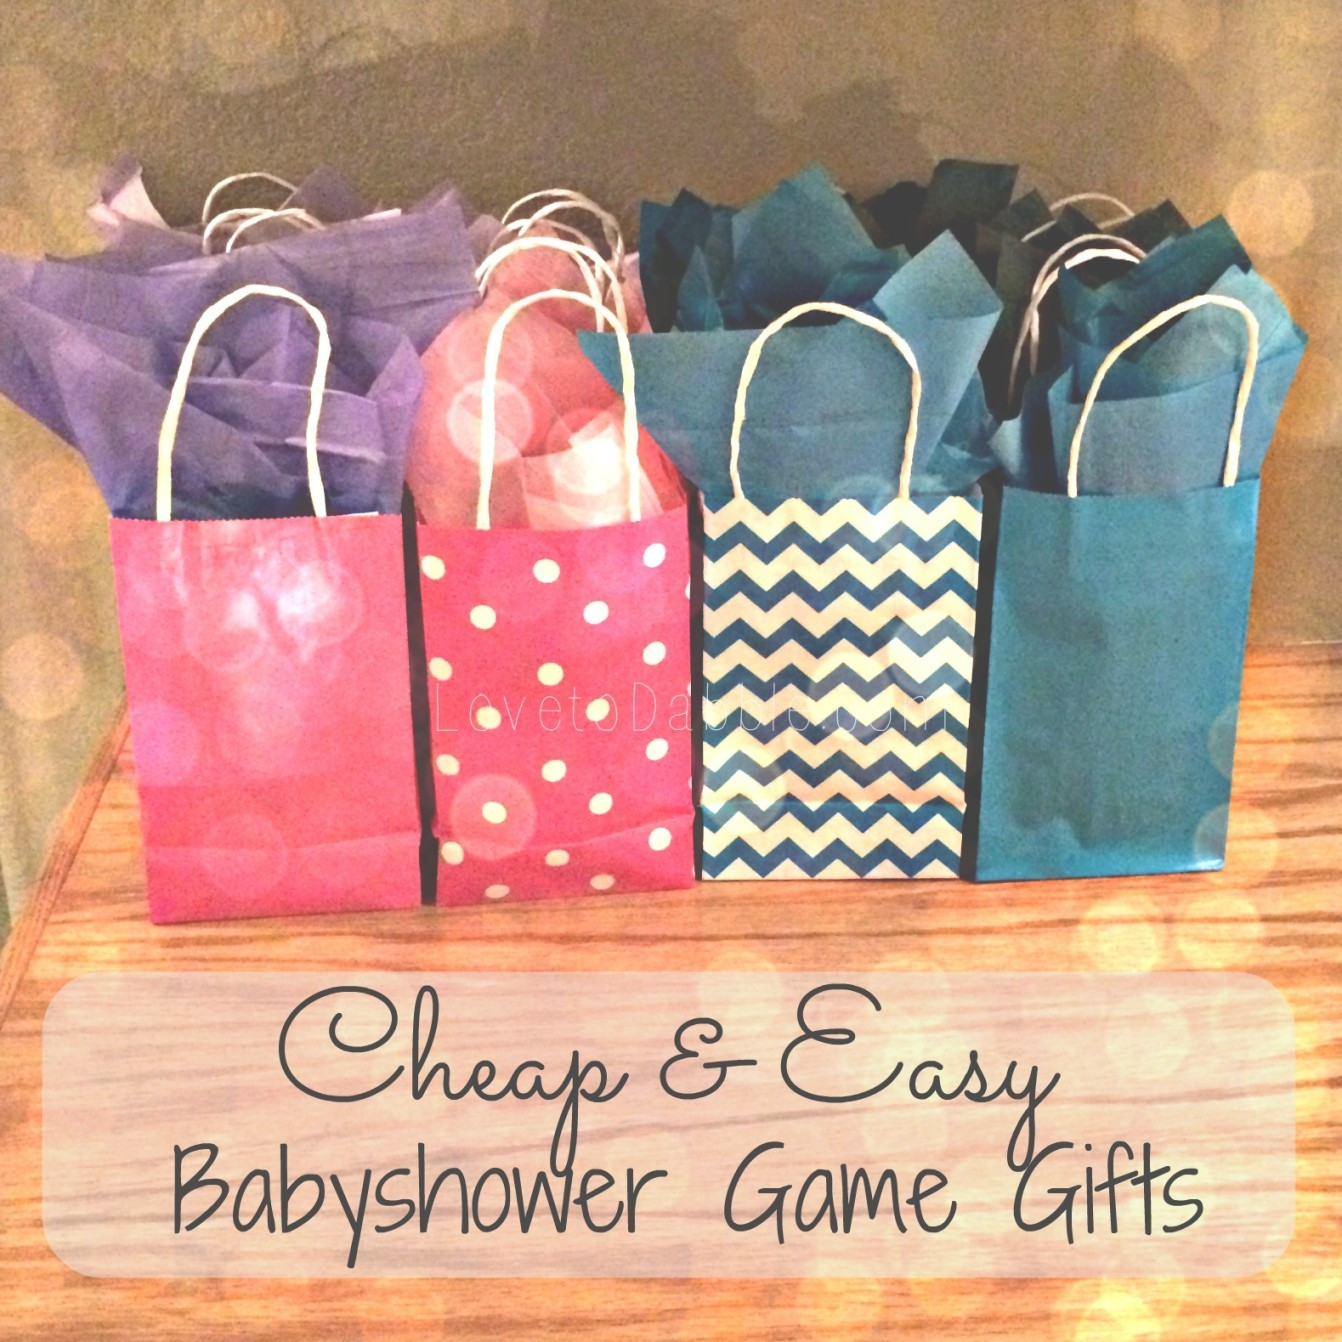 Baby Shower Door Prizes Gift Ideas
 Favors & Gifts Creative Wedding Shower Prizes Inspiration